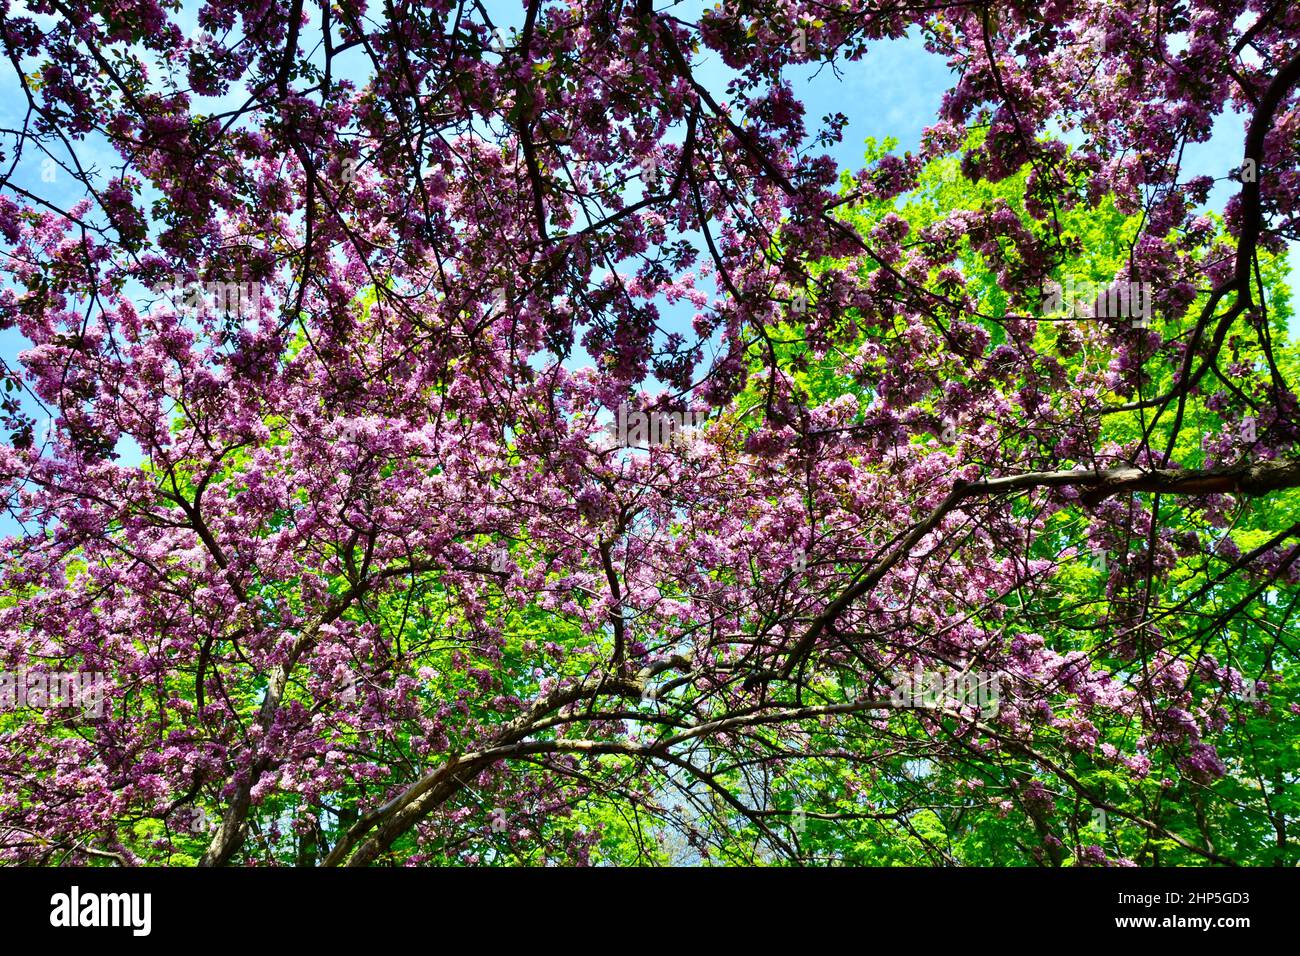 View from underneath tree with bright pink flowers at High Park during Spring Stock Photo